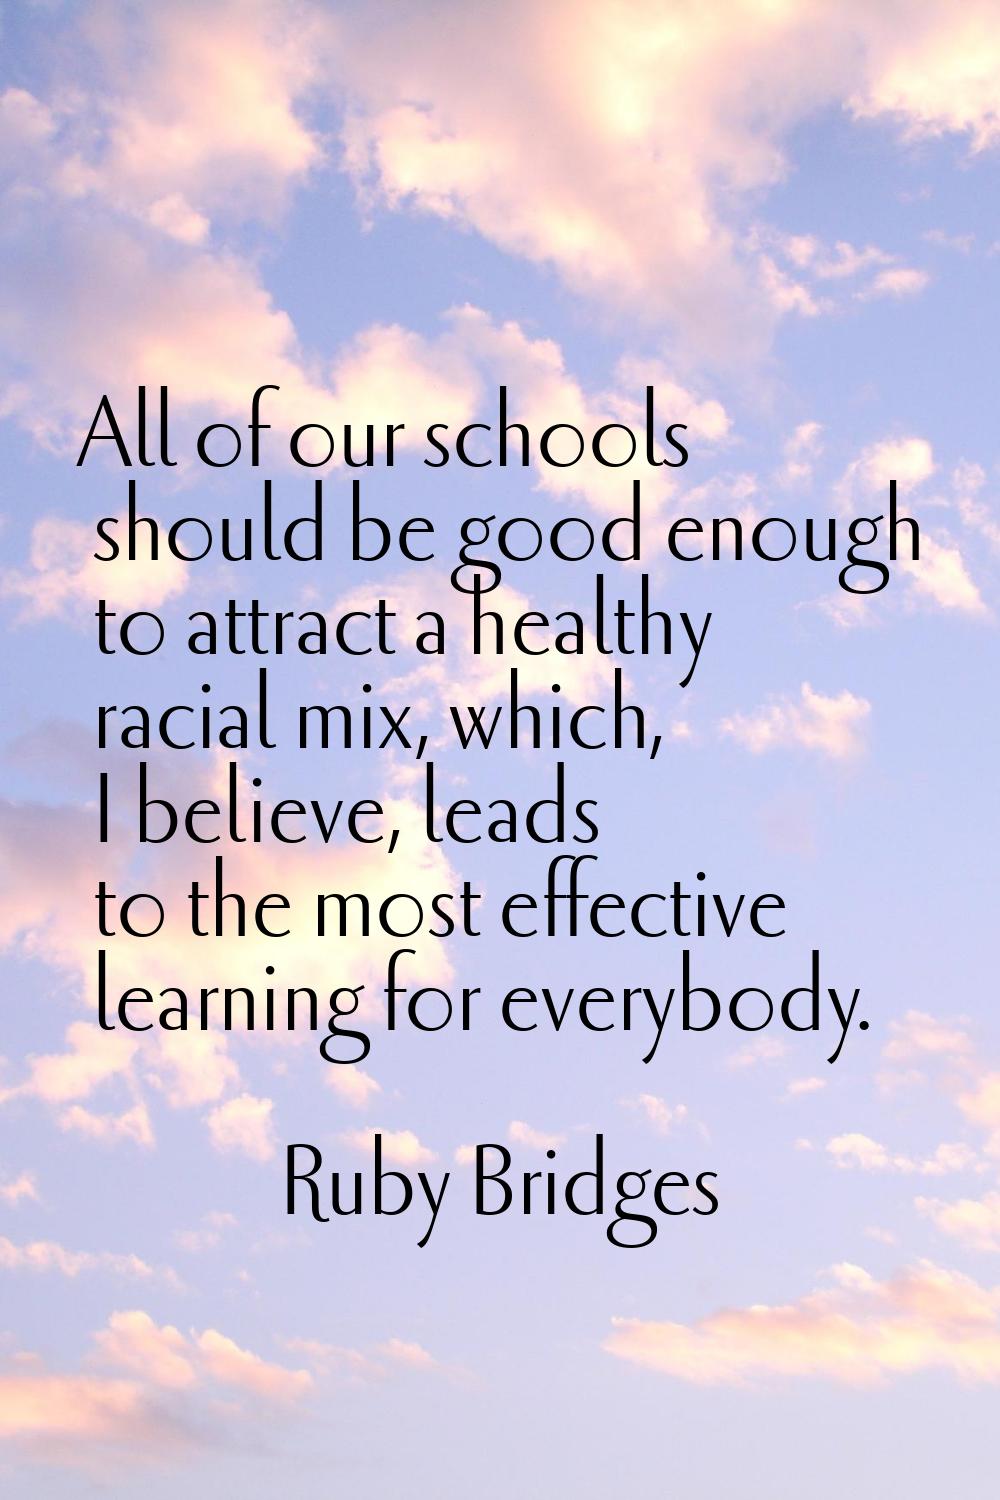 All of our schools should be good enough to attract a healthy racial mix, which, I believe, leads t